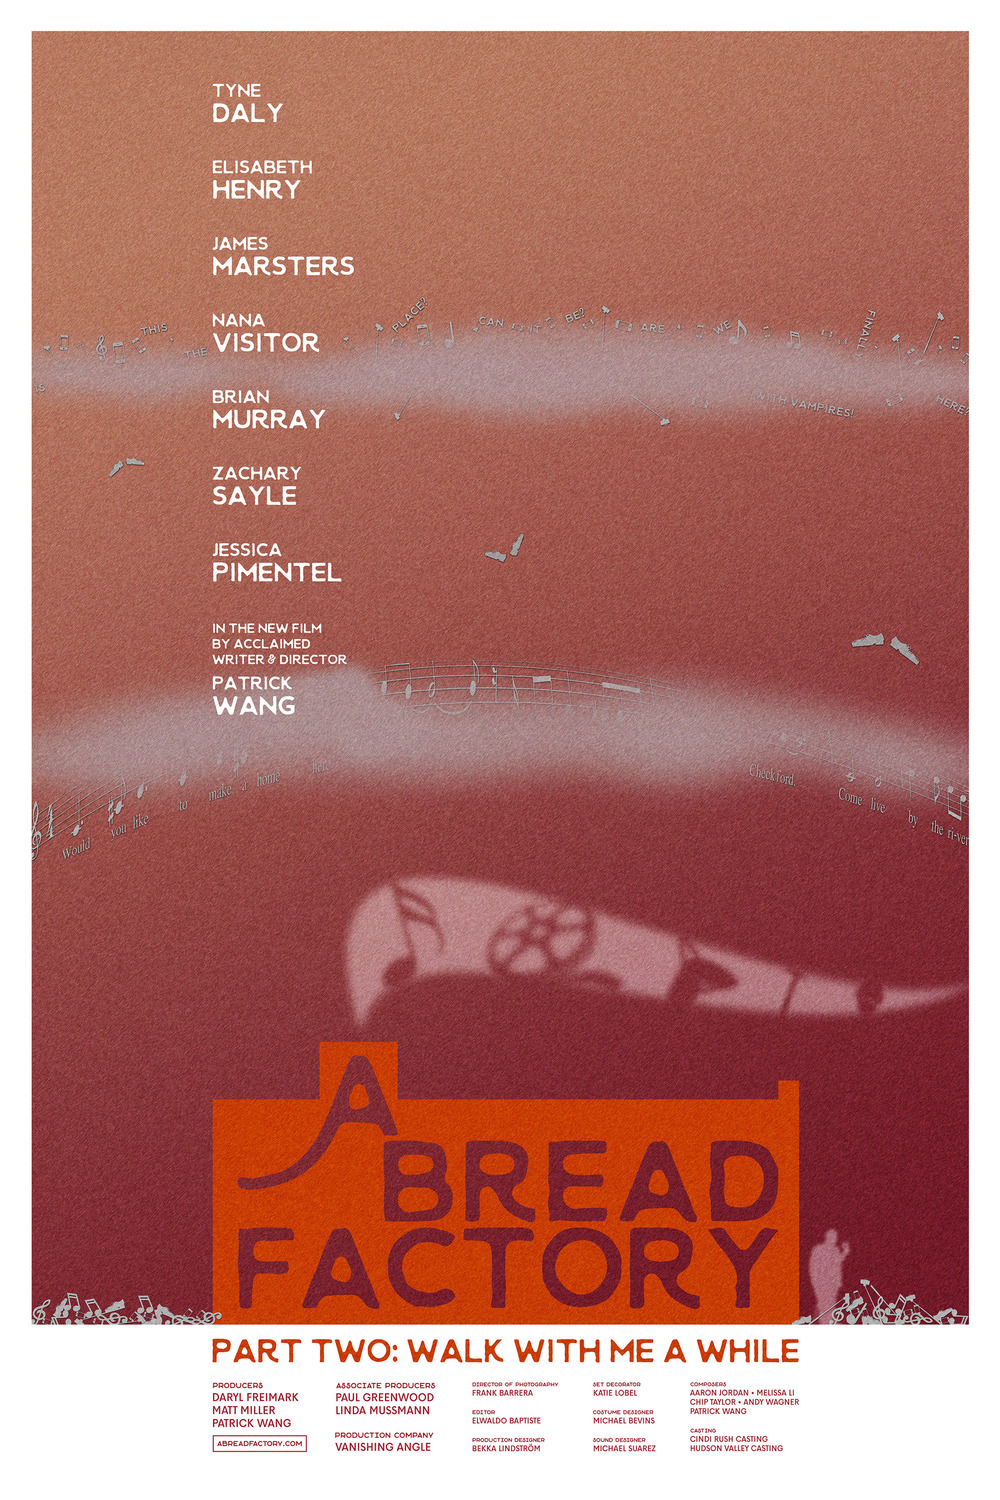 Extra Large Movie Poster Image for A Bread Factory, Part Two 